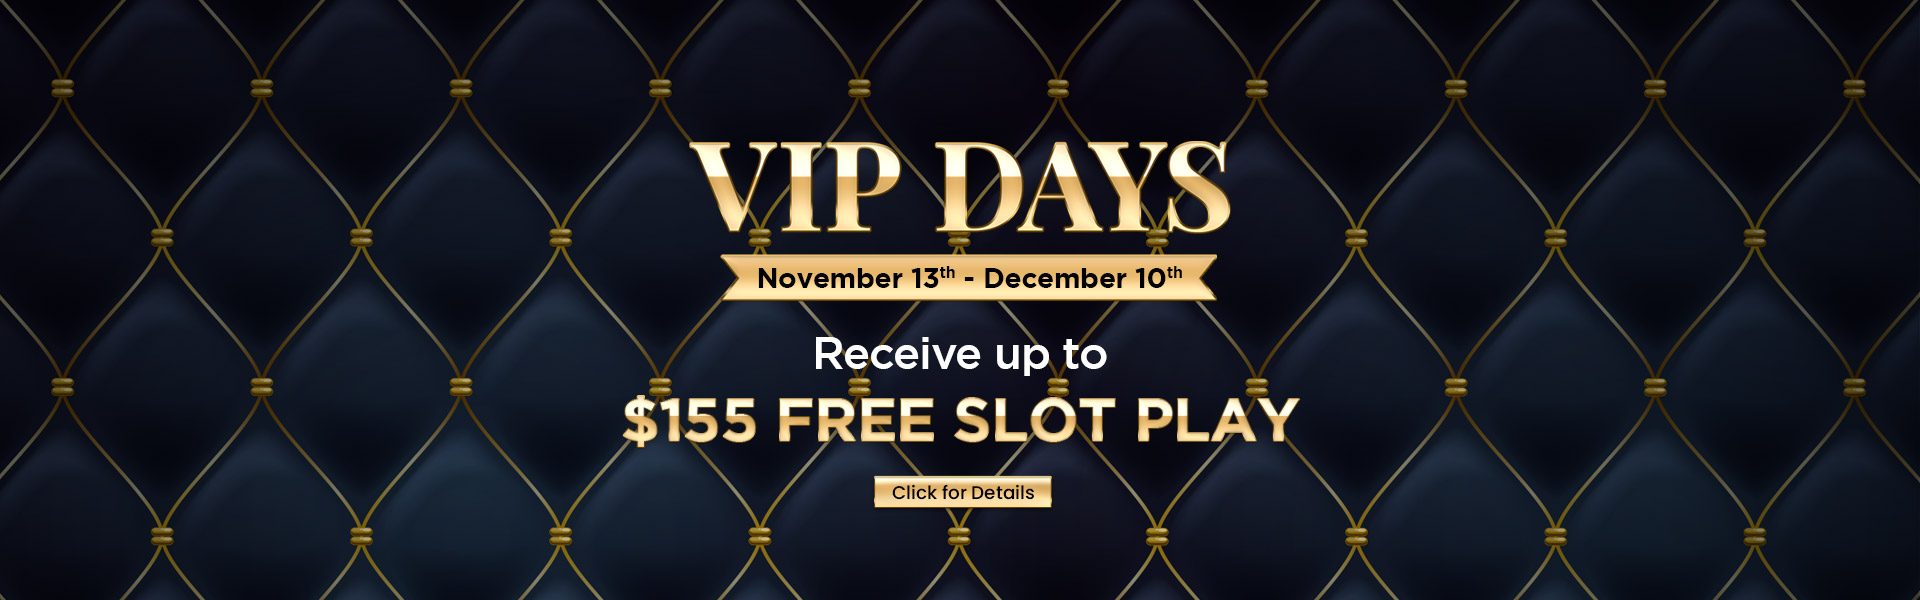 VIP-Days-Home-Page-Banner